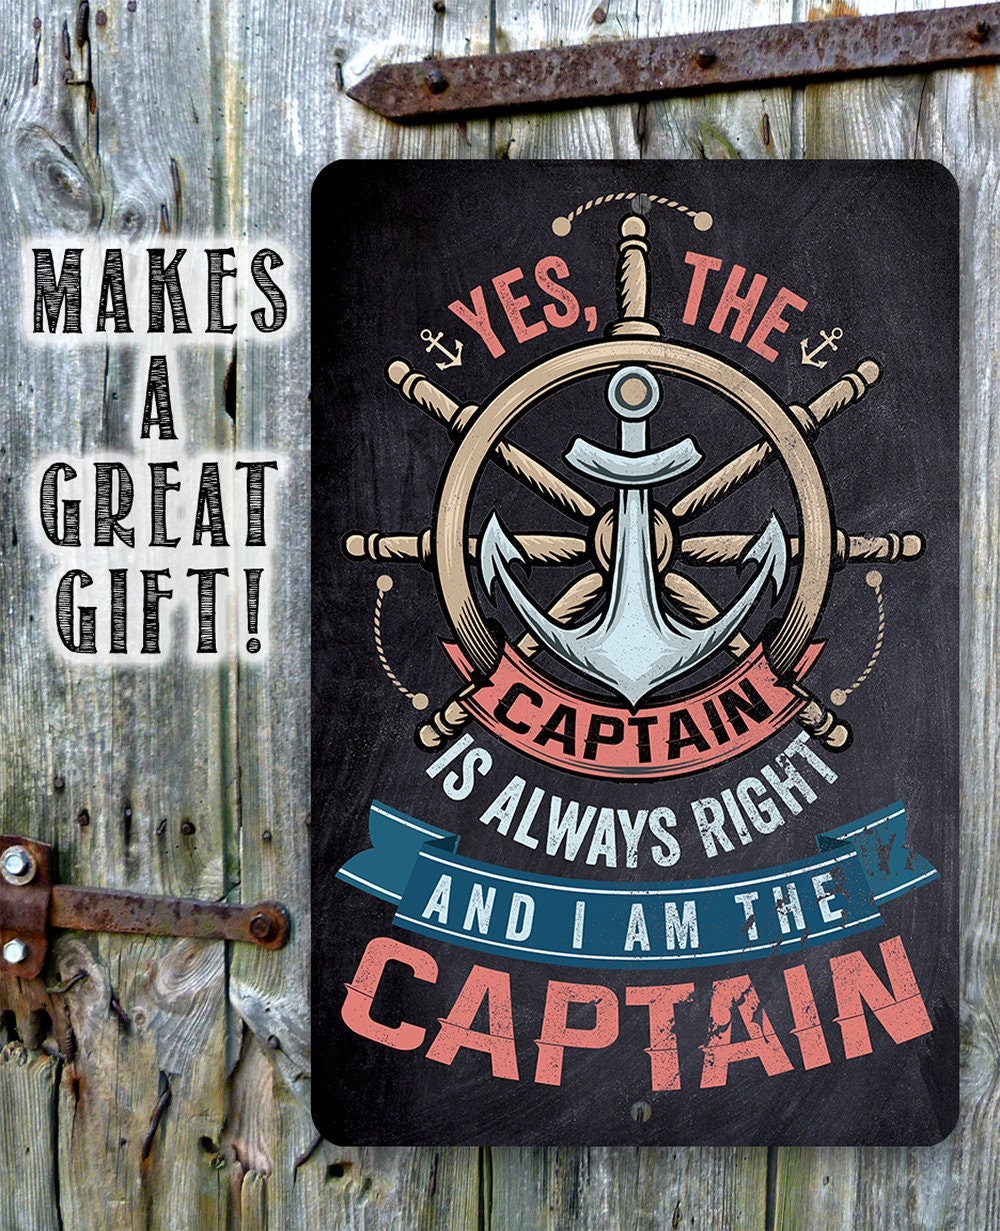 Yes The Captain Is Always Right And I Am The Captain - Metal Sign Metal Sign Lone Star Art 